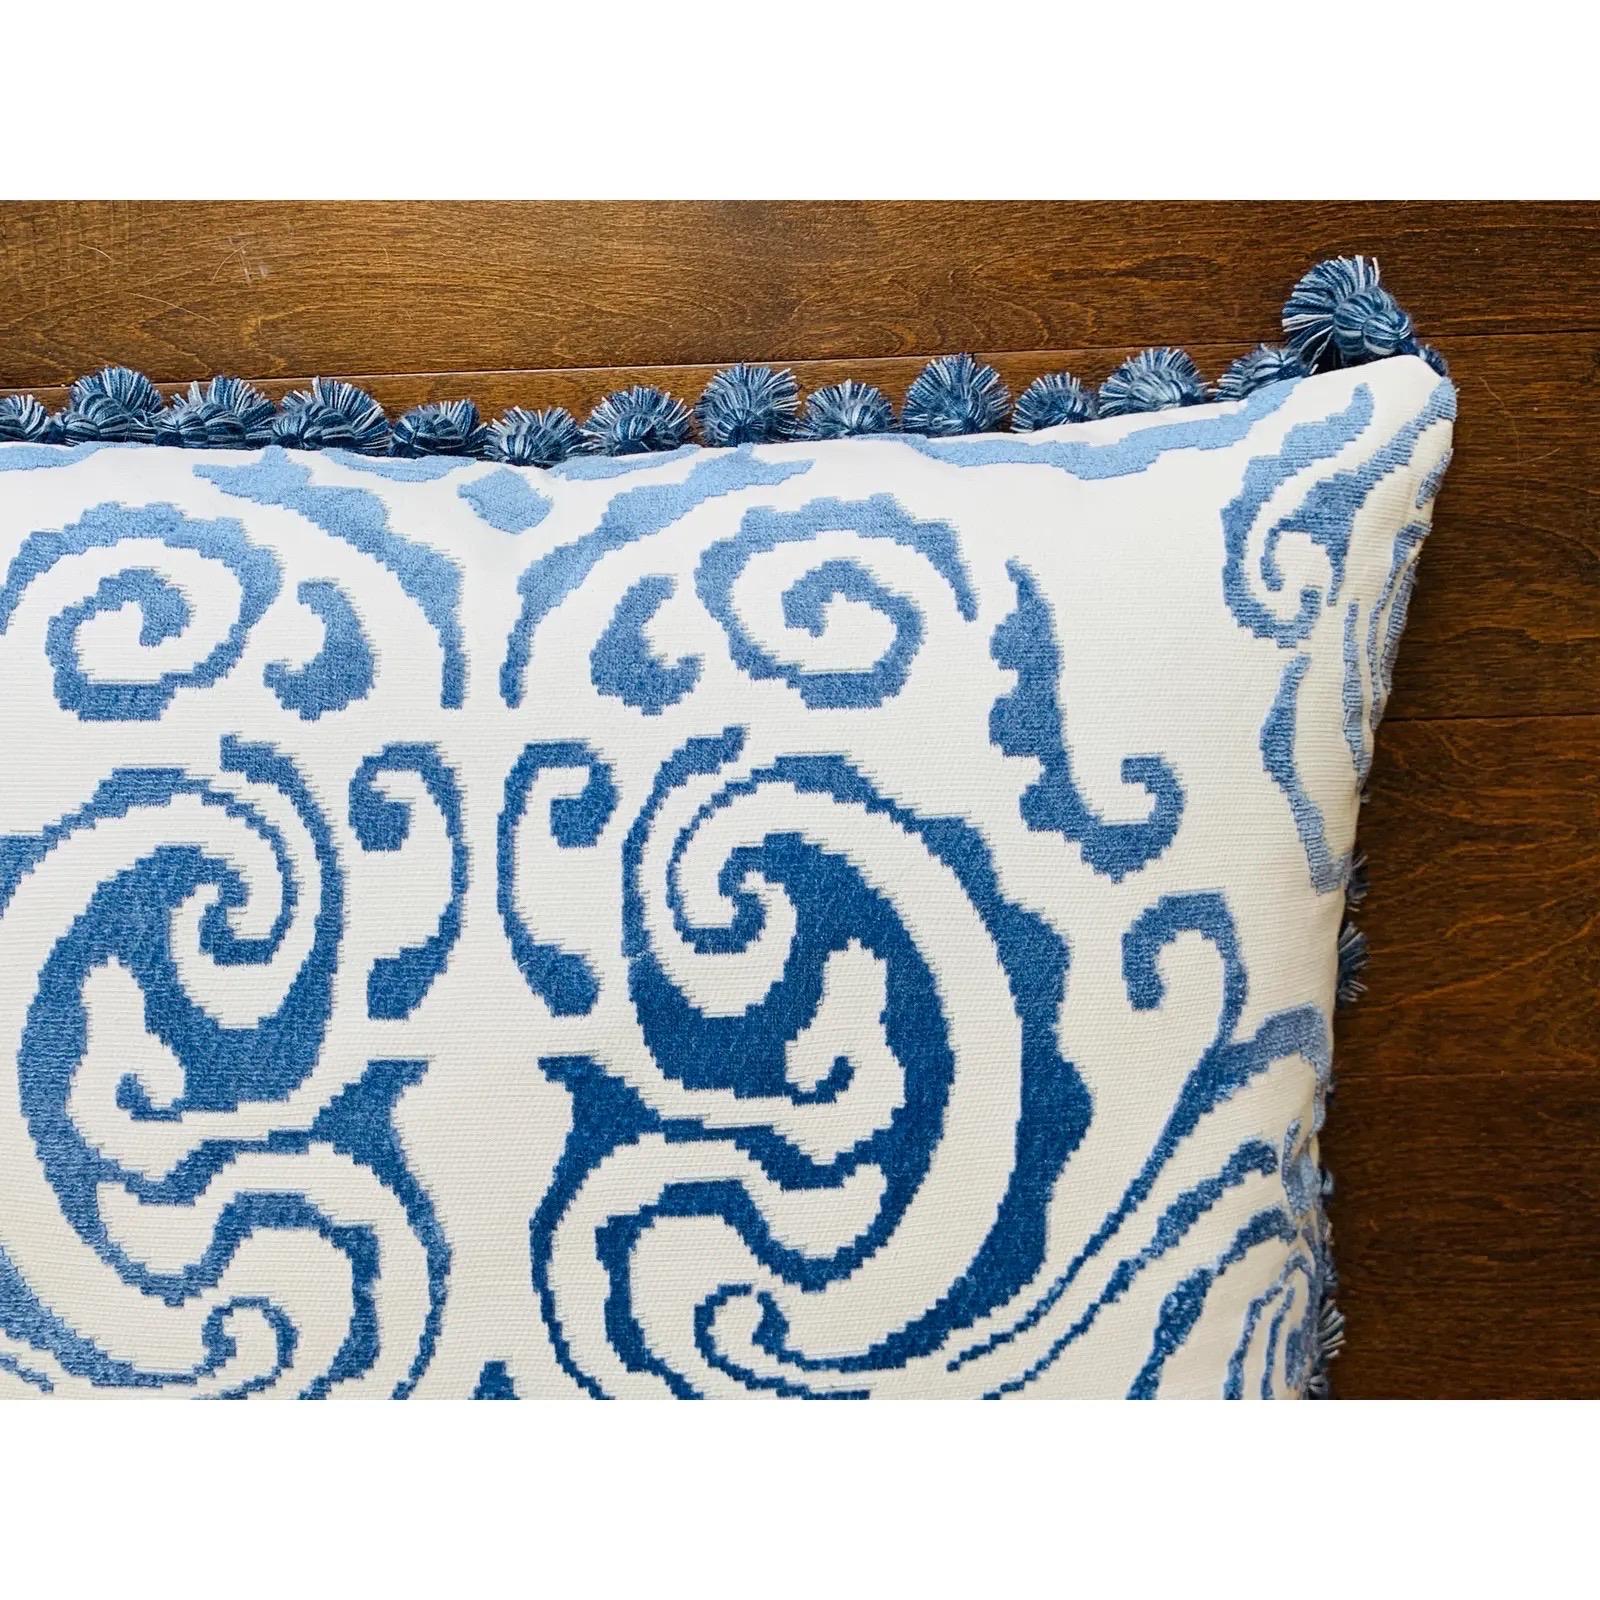 Scalamandré 'Cirrus Velvet Damask' White and Blue Pillows With Fringe, Pair For Sale 3